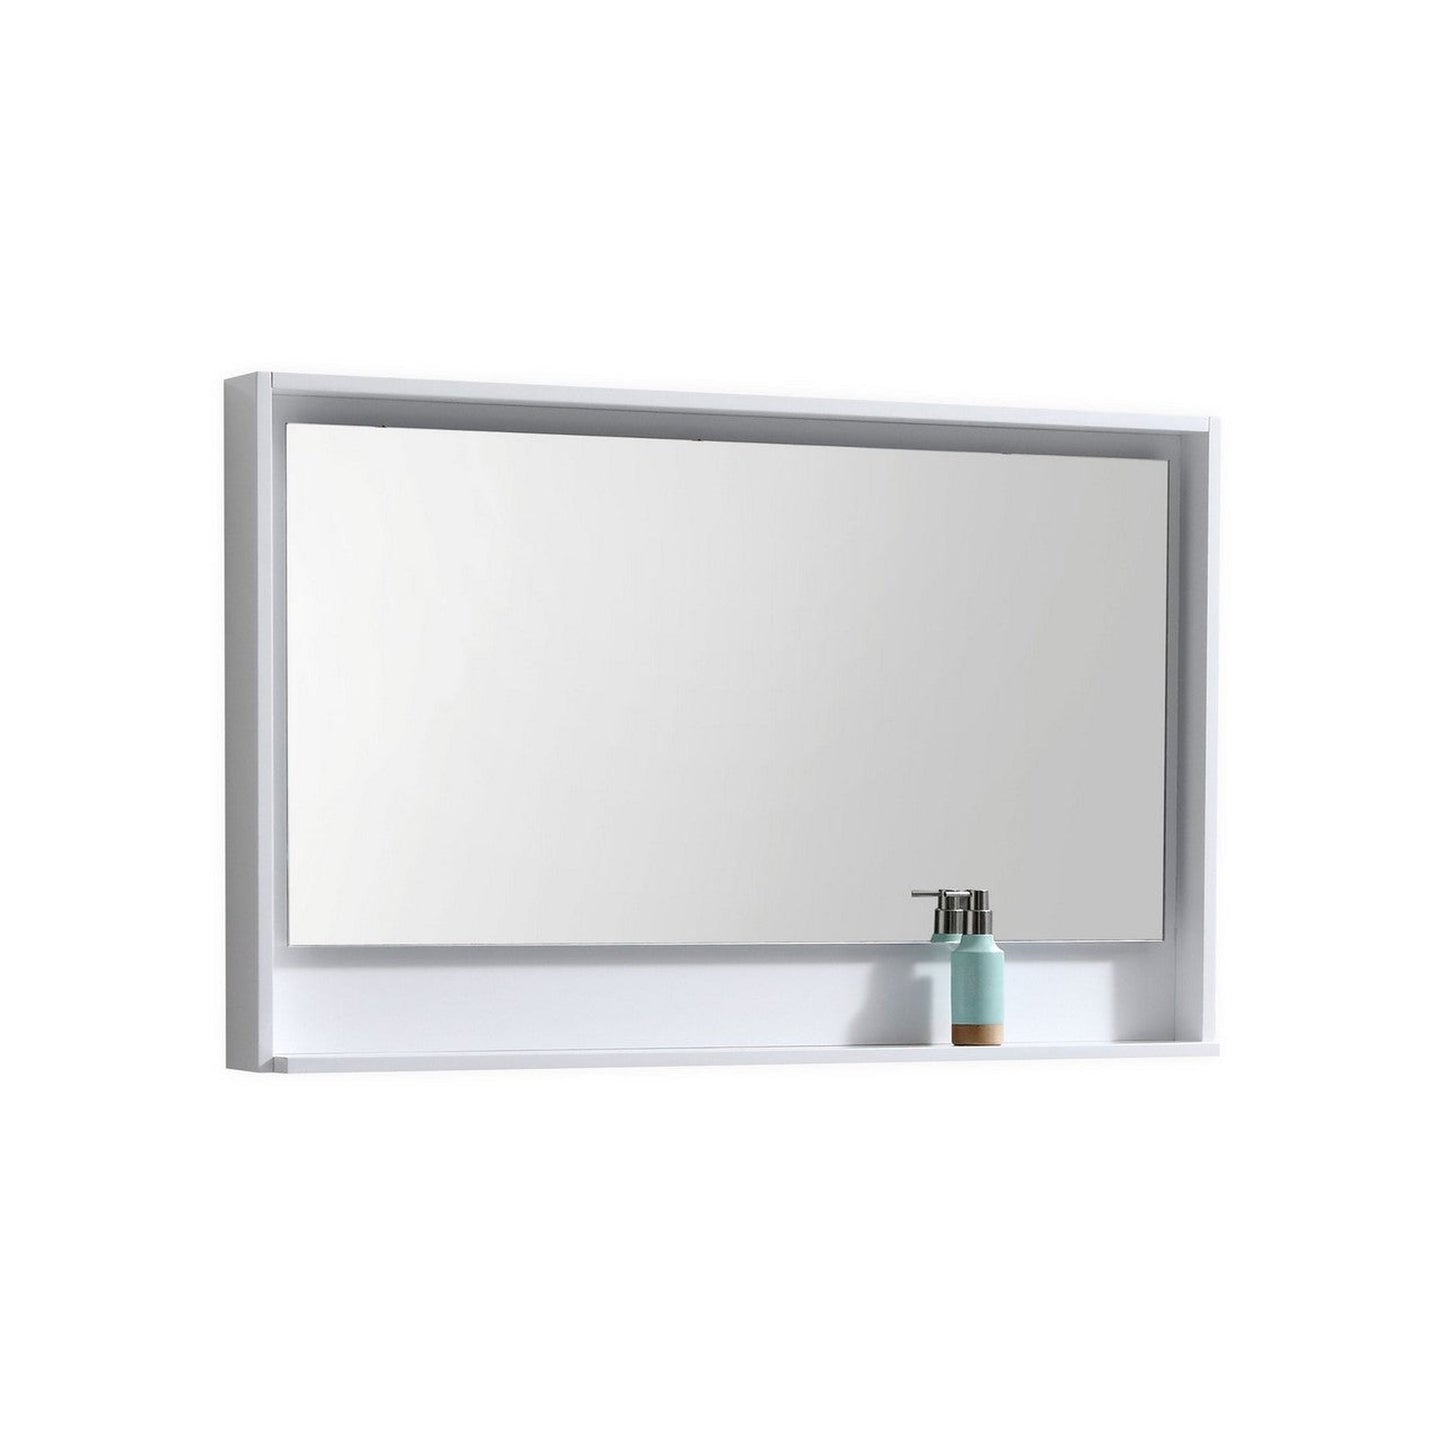 KubeBath Cisco 48" Stainless Steel Chrome Console Freestanding Modern Bathroom Vanity With Single Integrated Acrylic Sink With Overflow and 48" White Framed Mirror